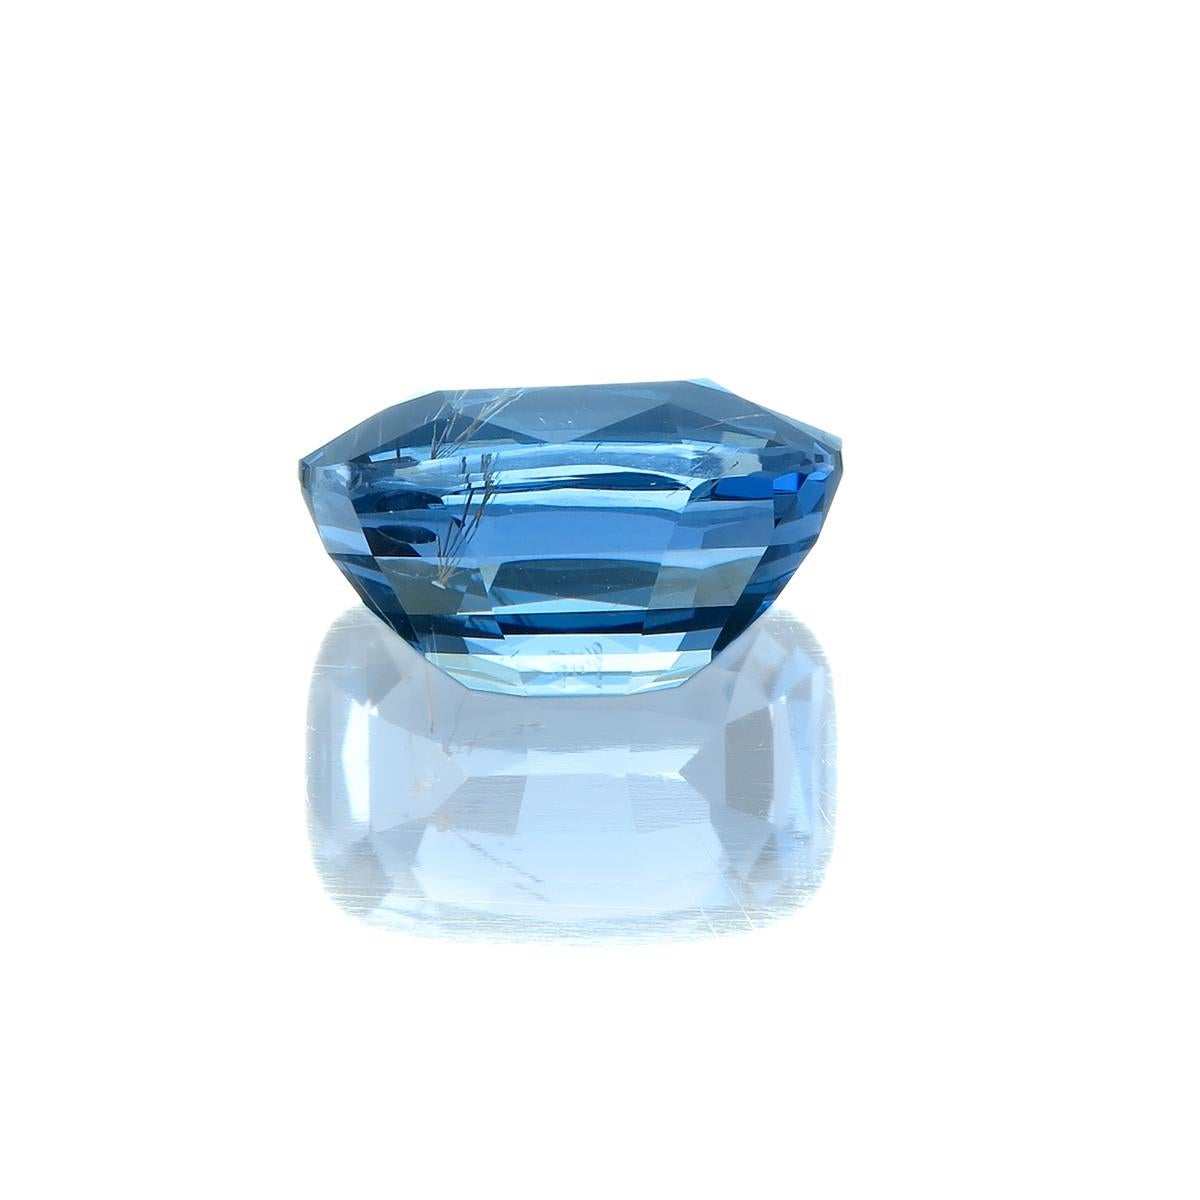 blue spinel stone